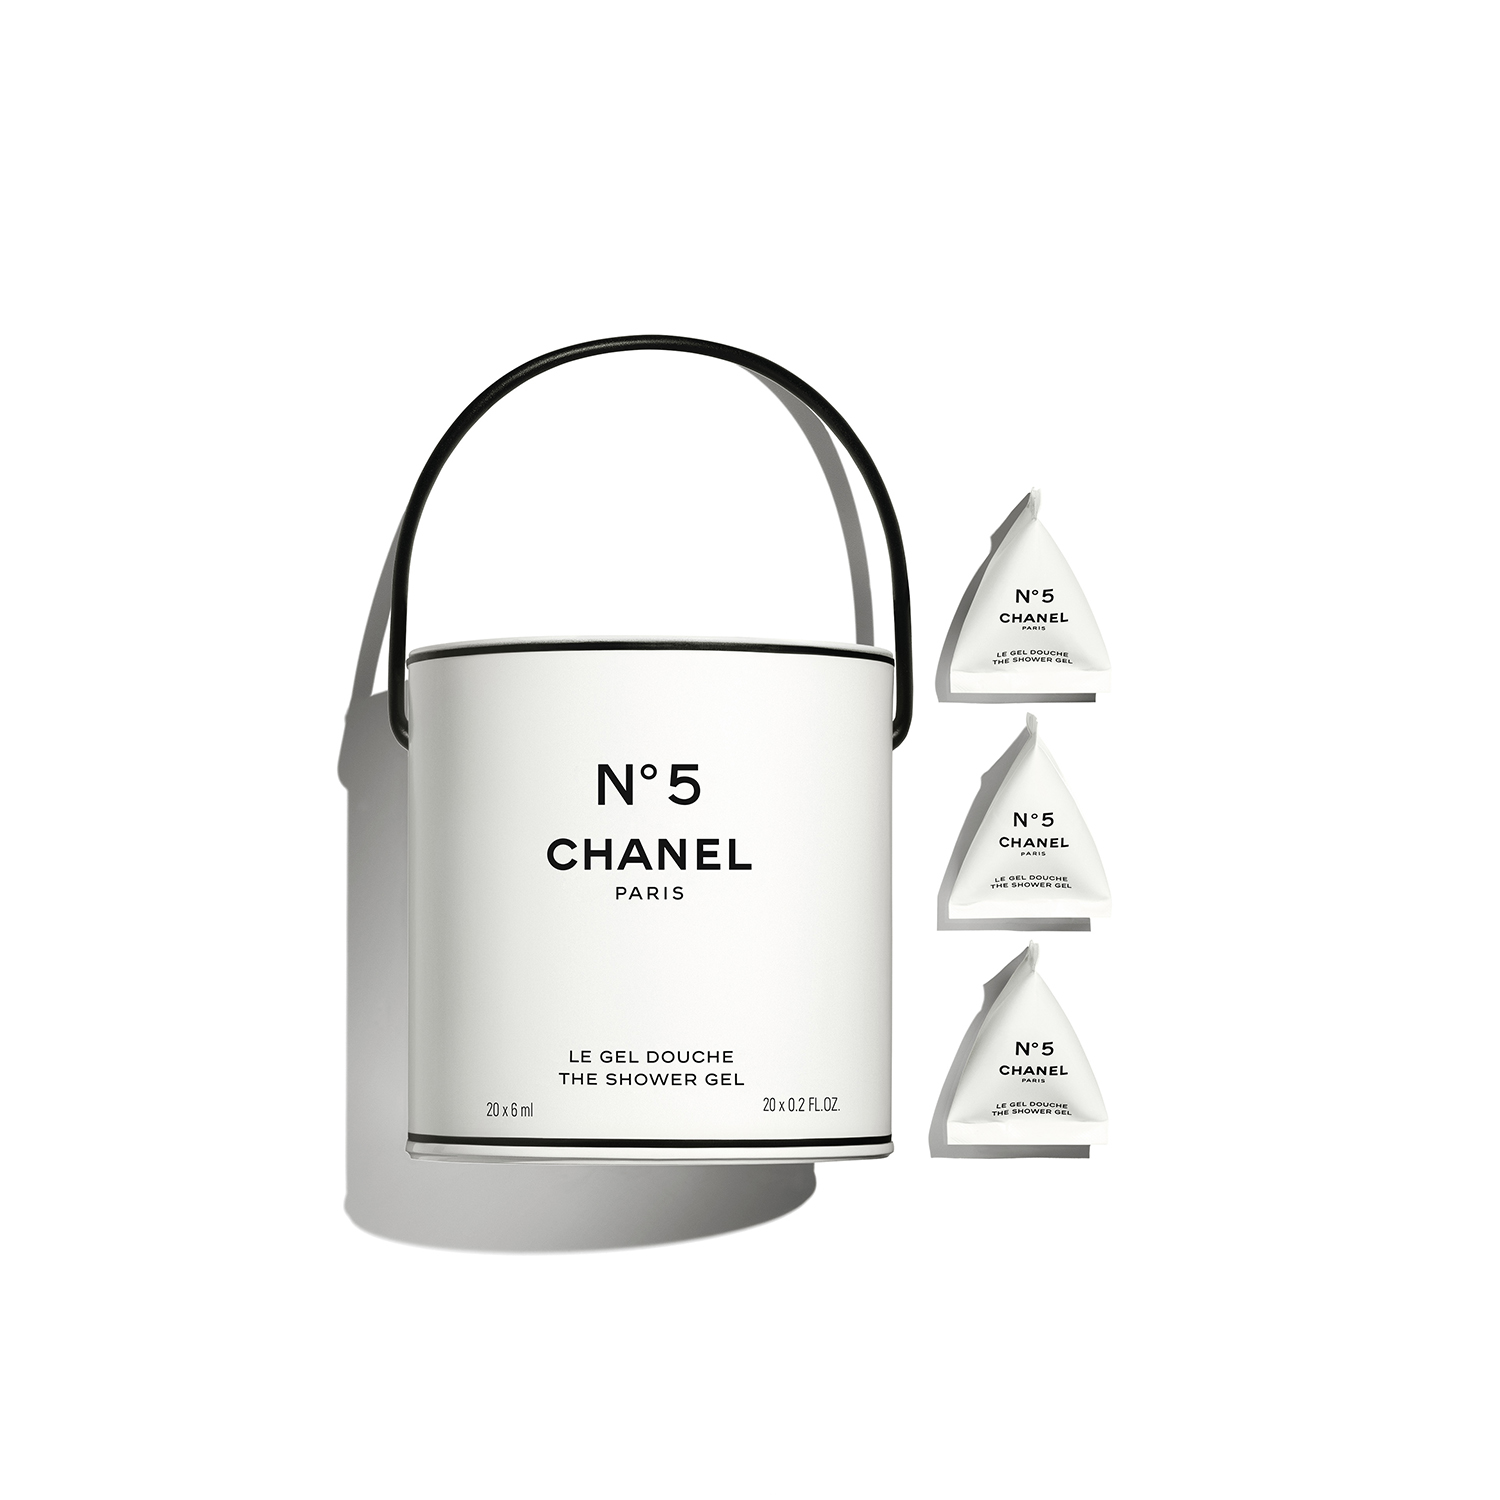 Chanel Celebrates 100 Years of N°5 with Factory 5 Collection - Coco Chanel  No. 5 Perfume